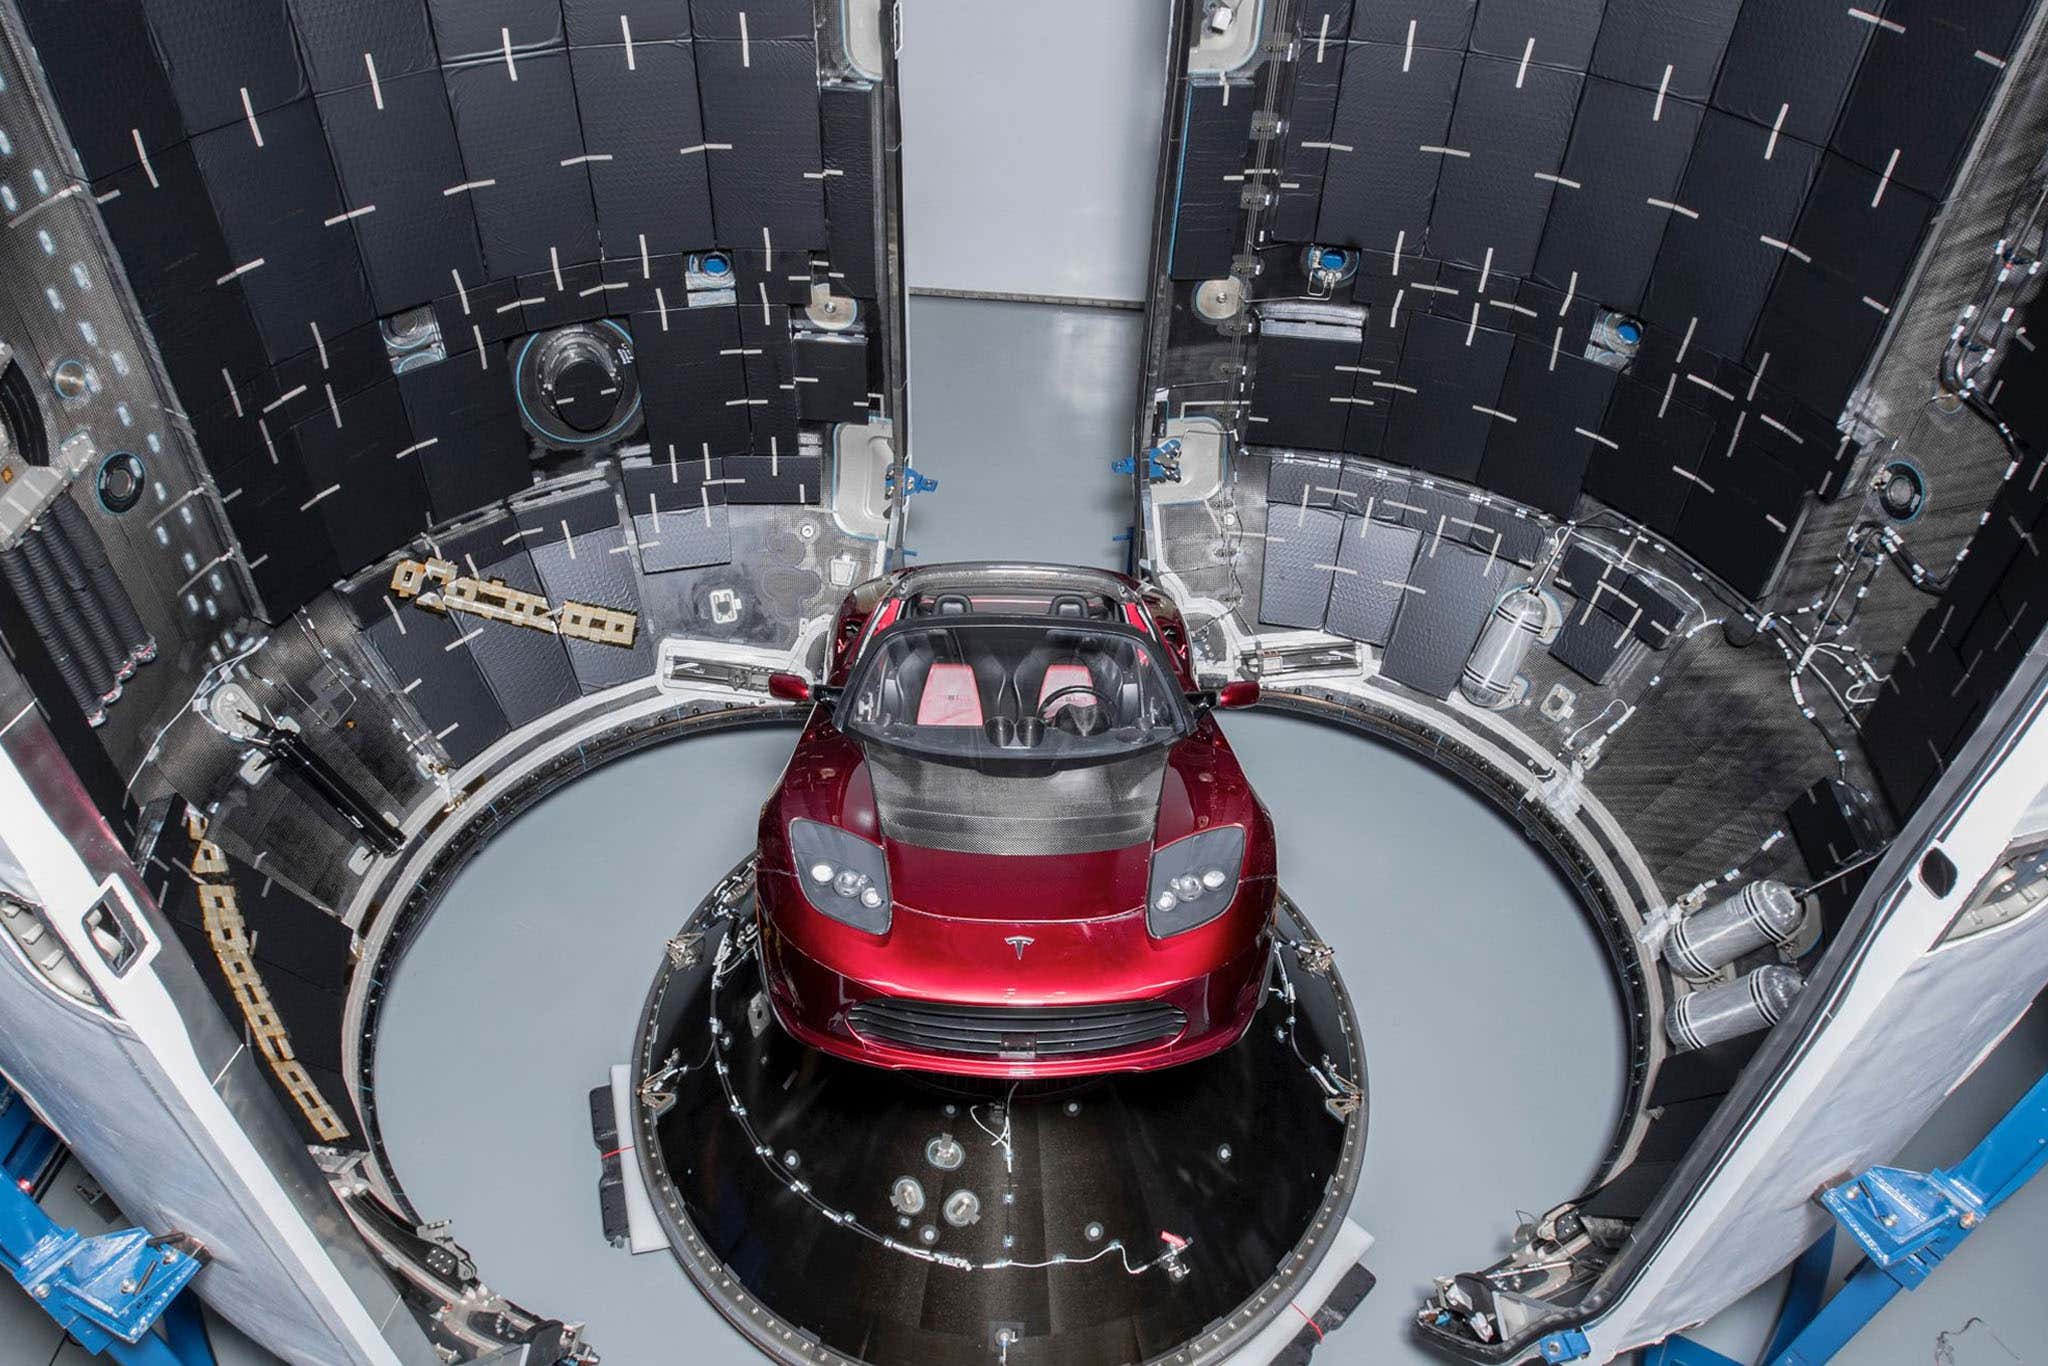 What would happen to a Tesla in space?